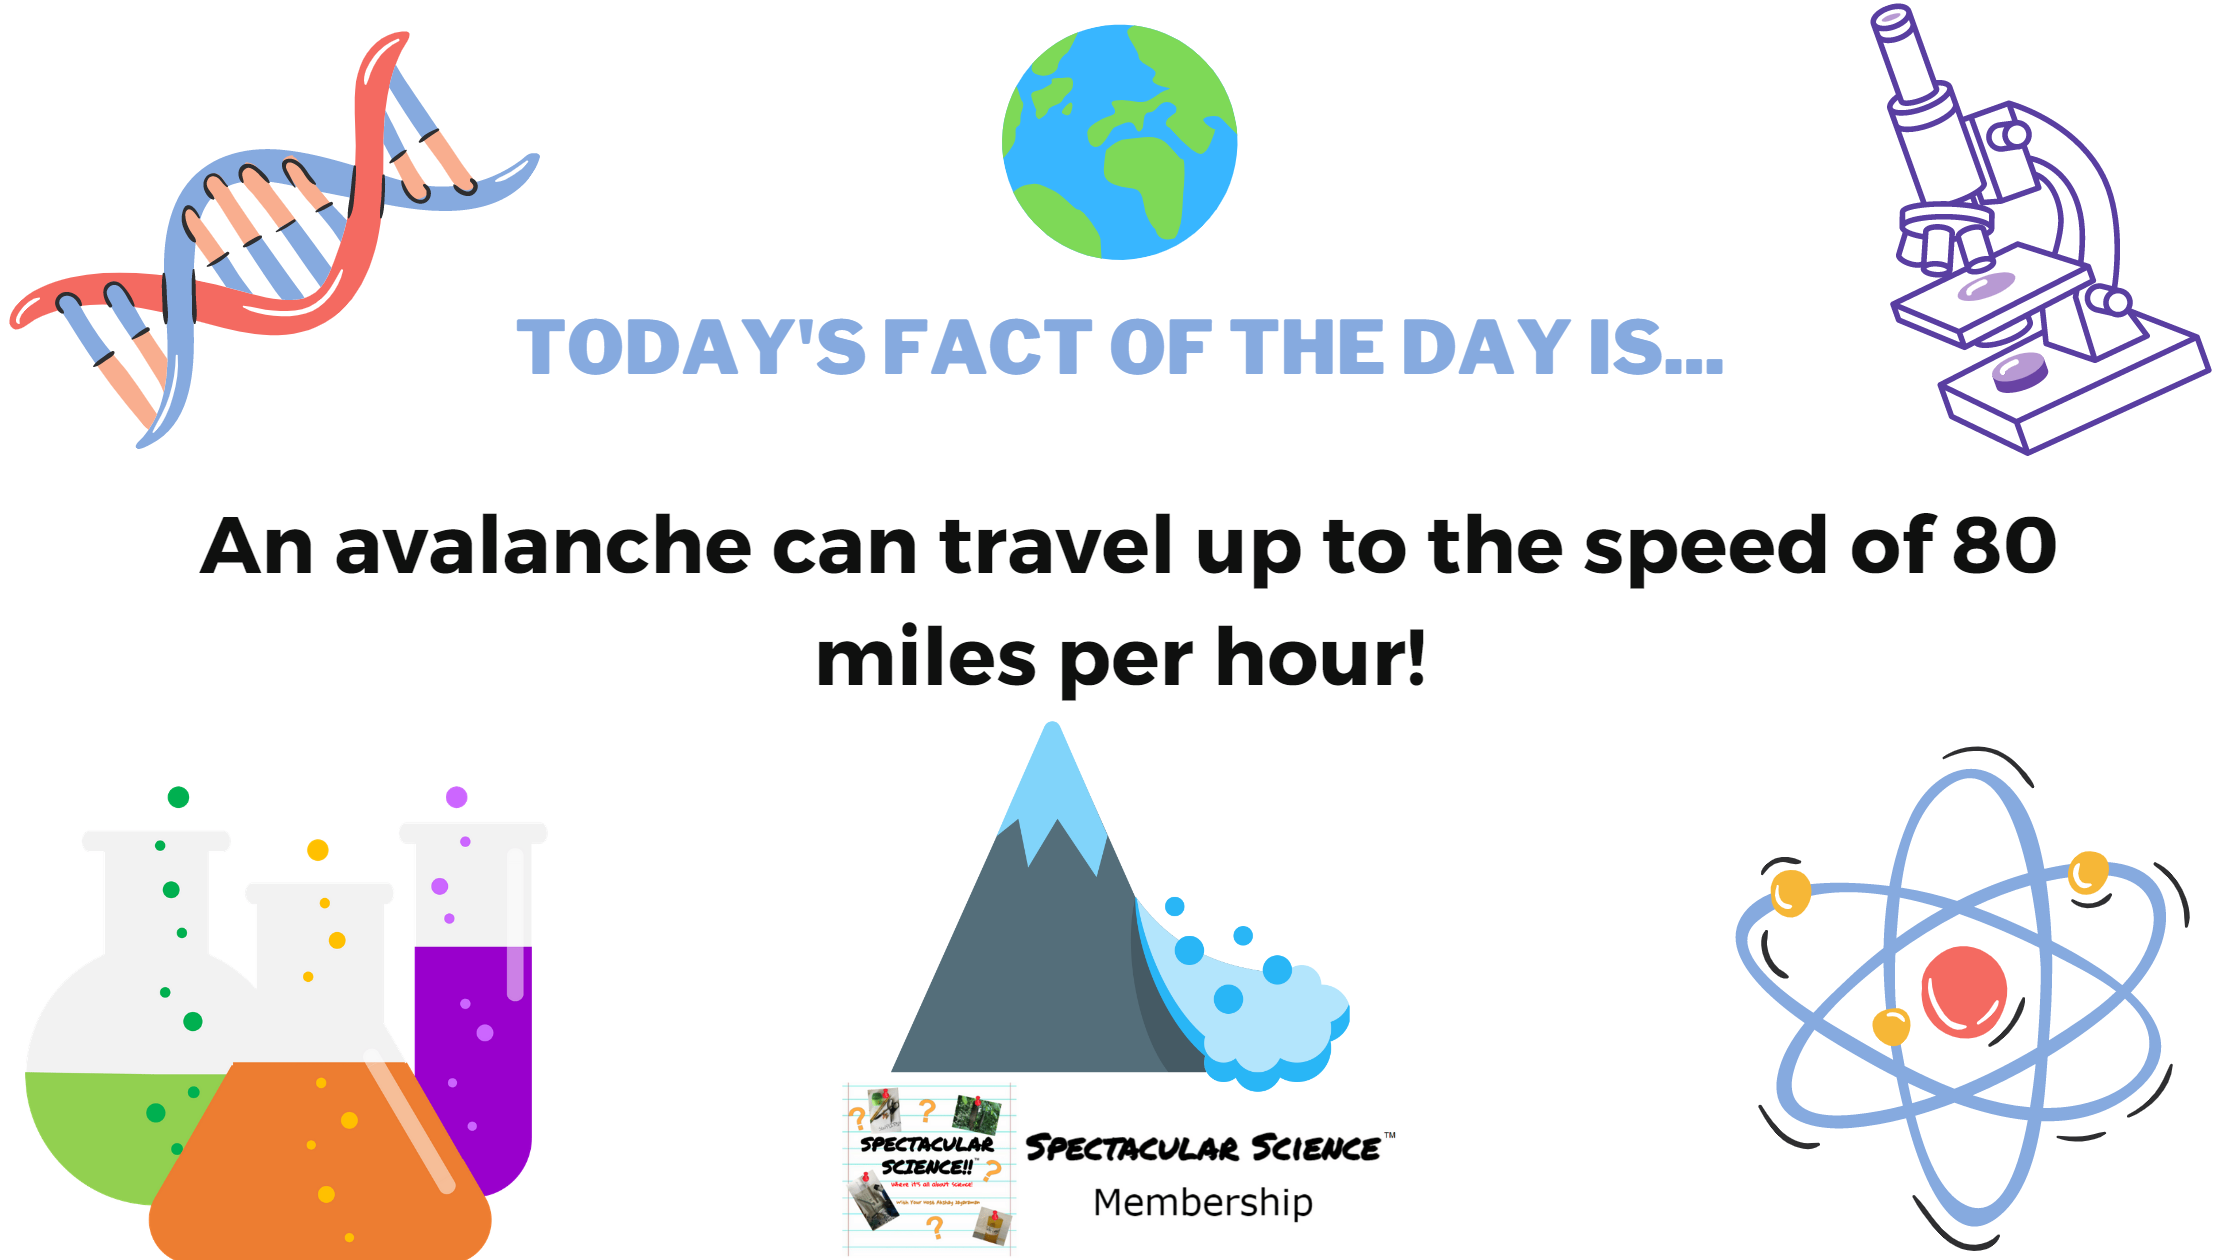 Fact of the Day Image December 30th